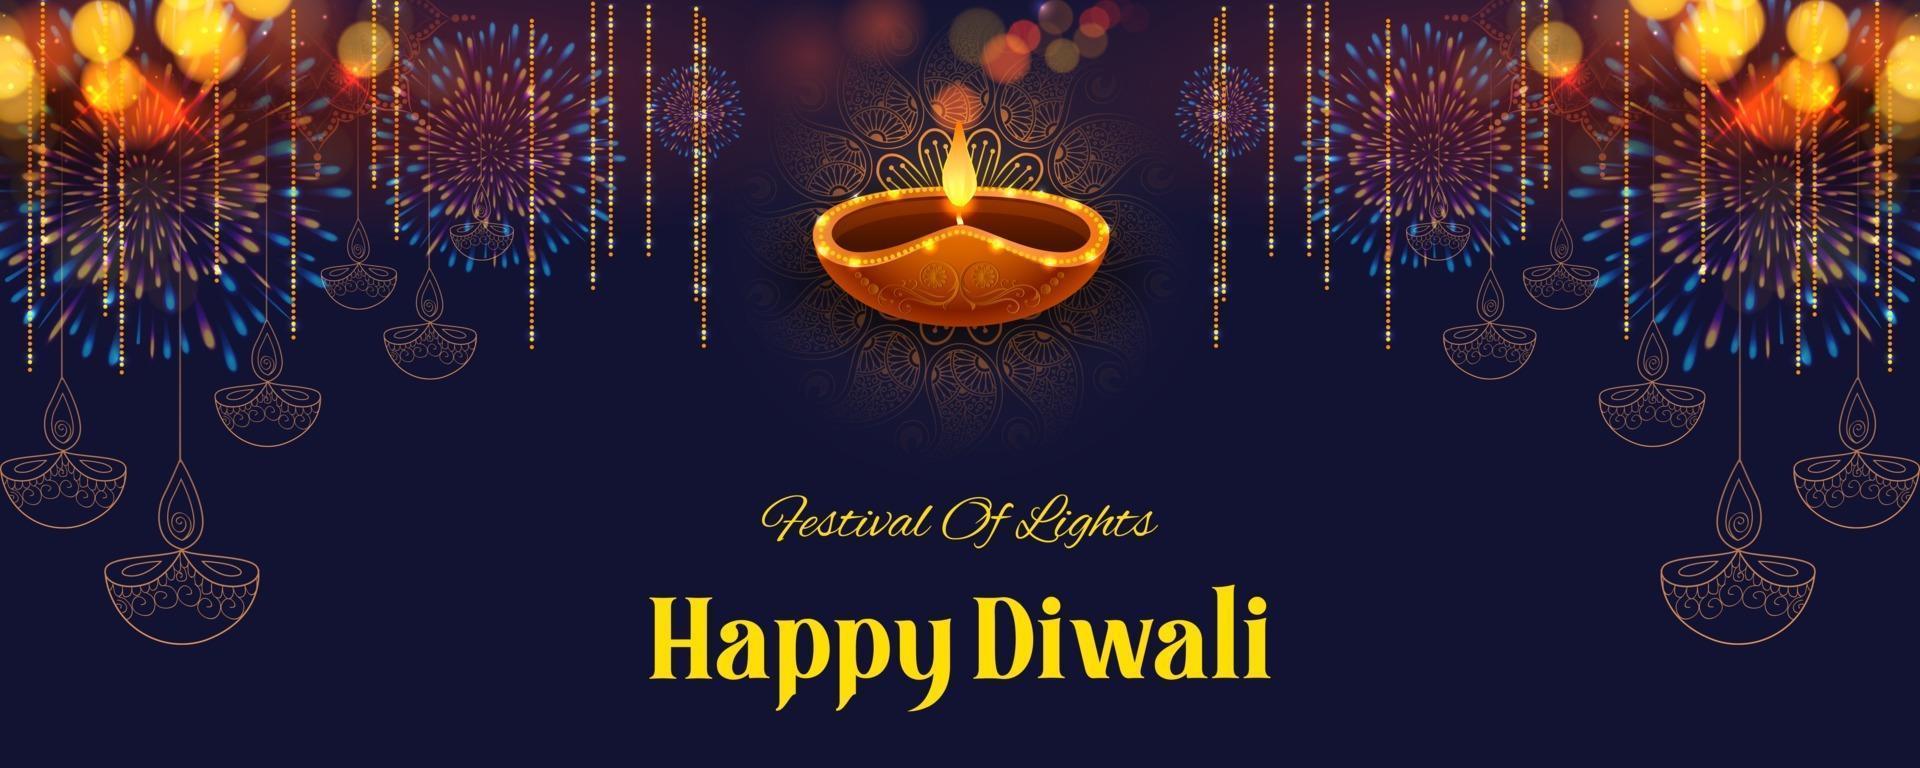 Happy Diwali Holiday background for light festival of India ...